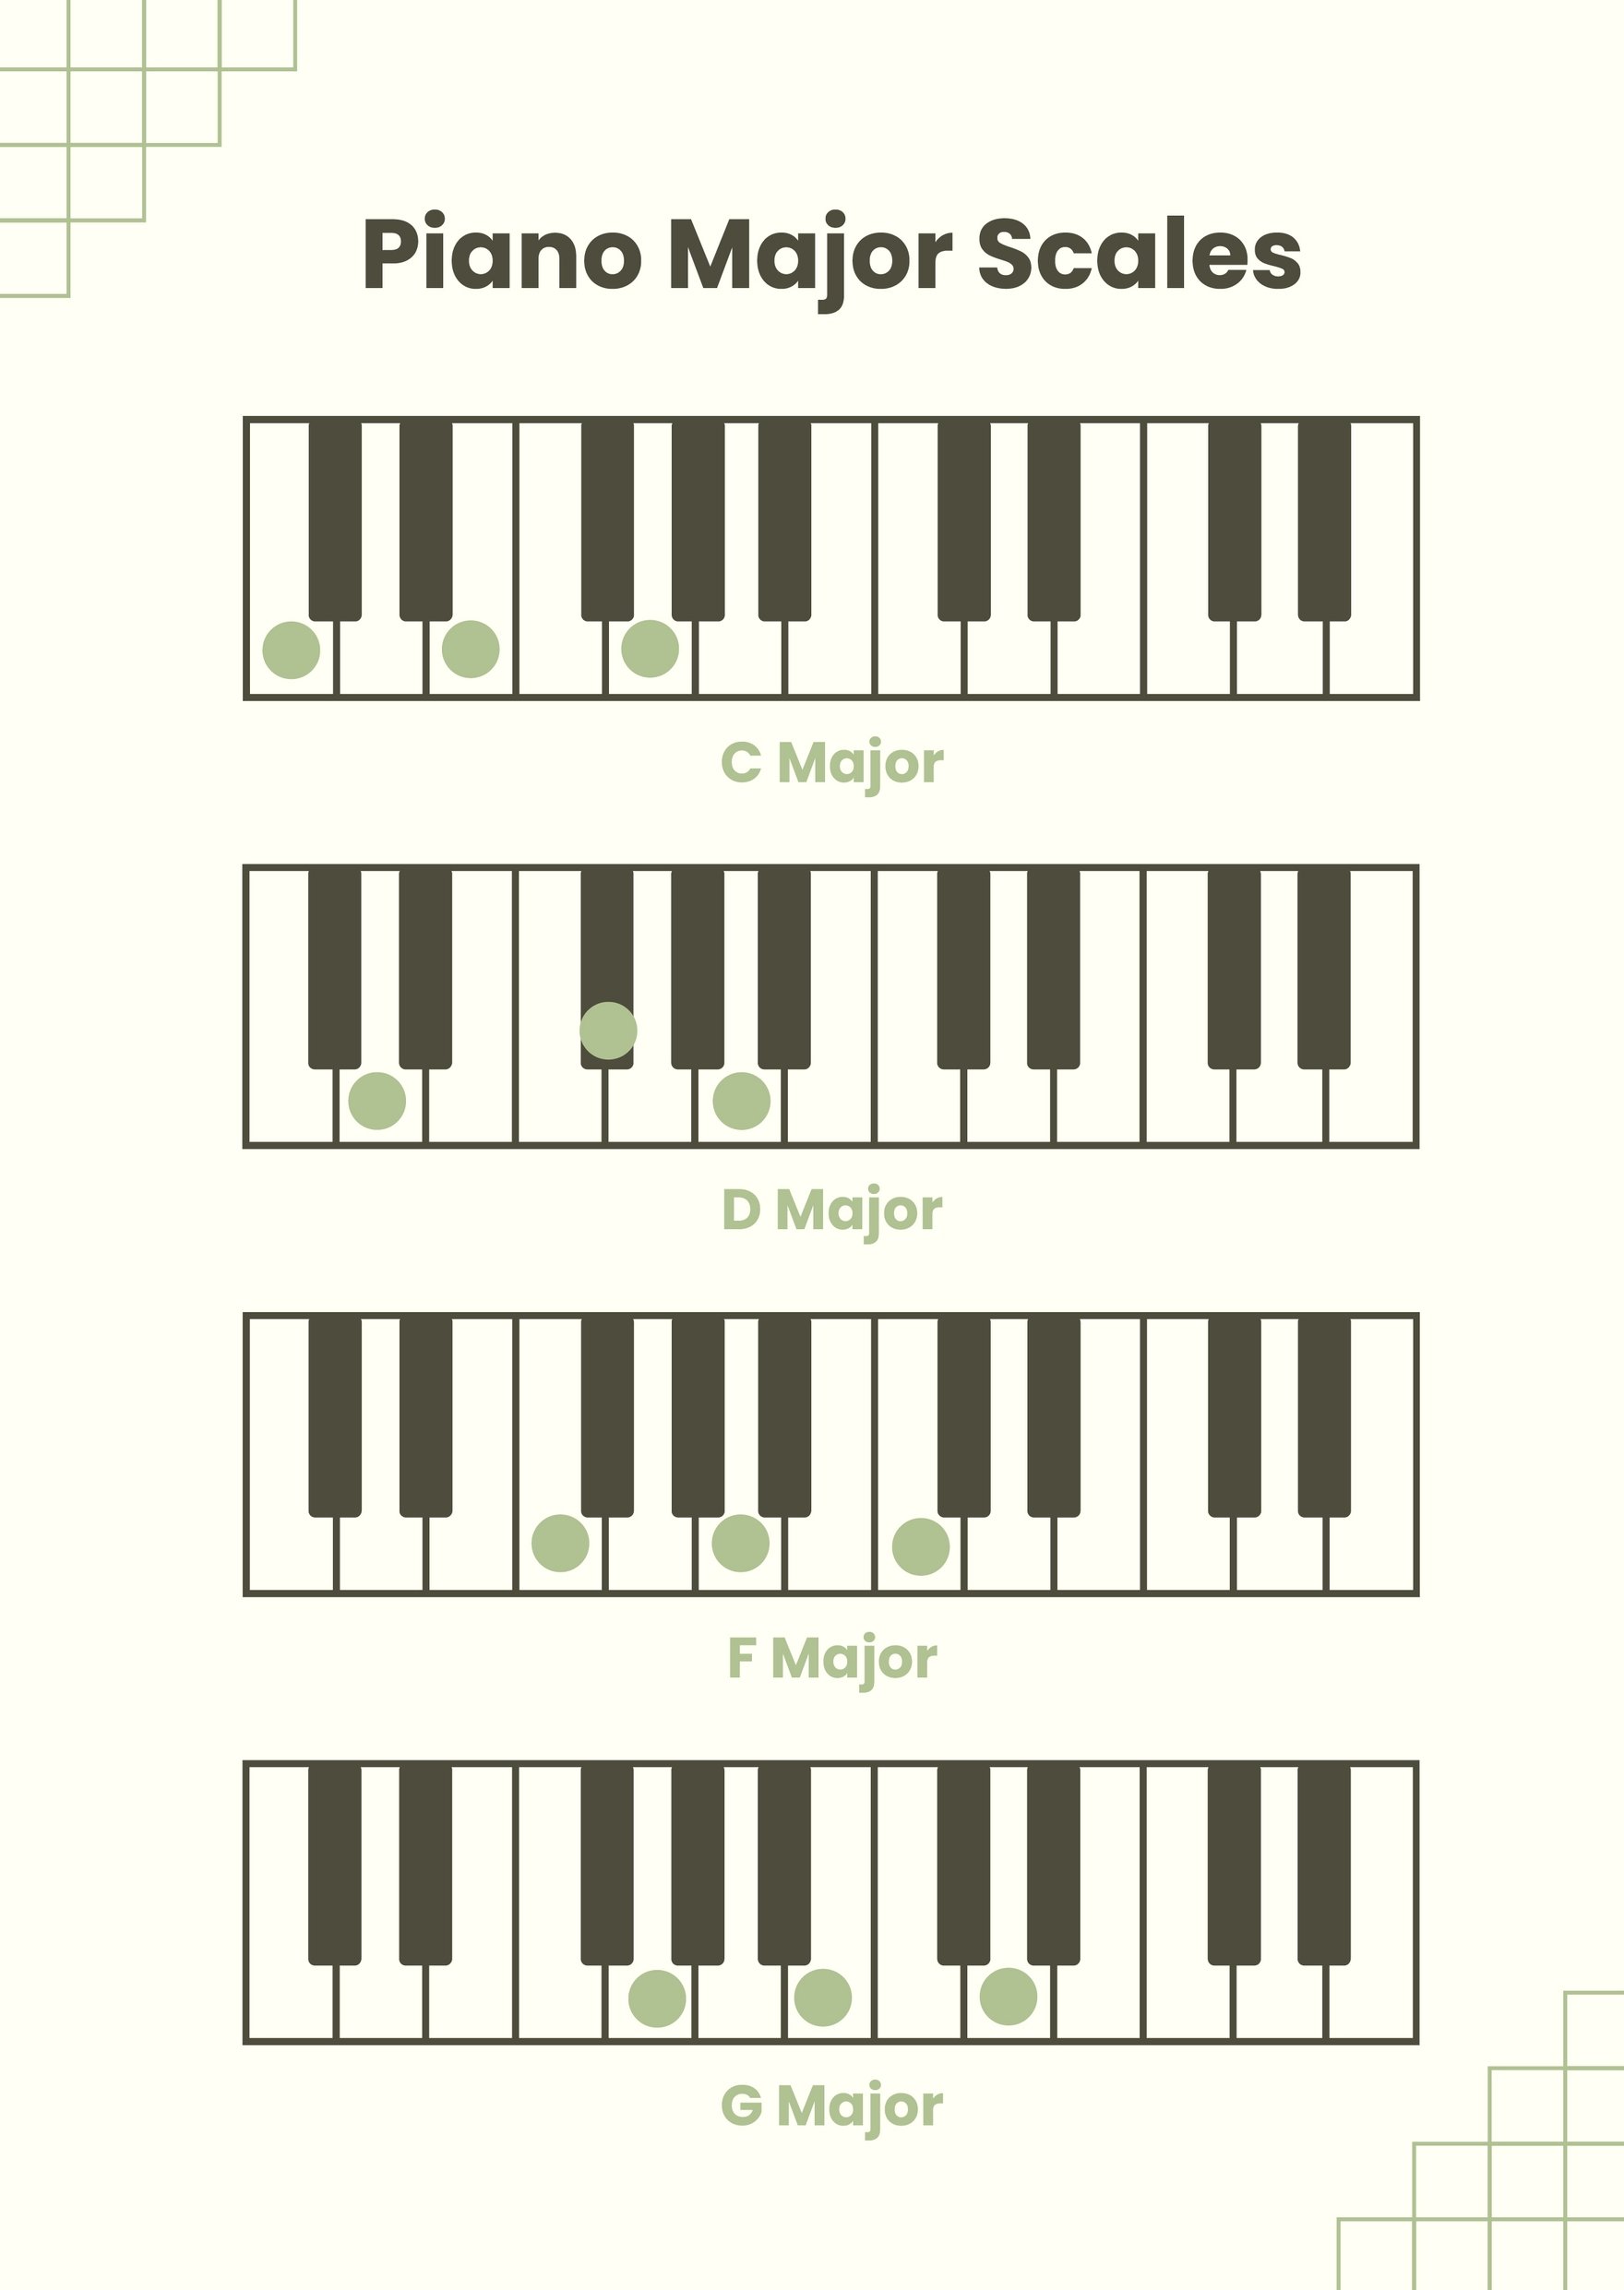 FREE Piano Notes Chart Template - Download in Word, Google Docs, PDF,  Illustrator, Apple Pages